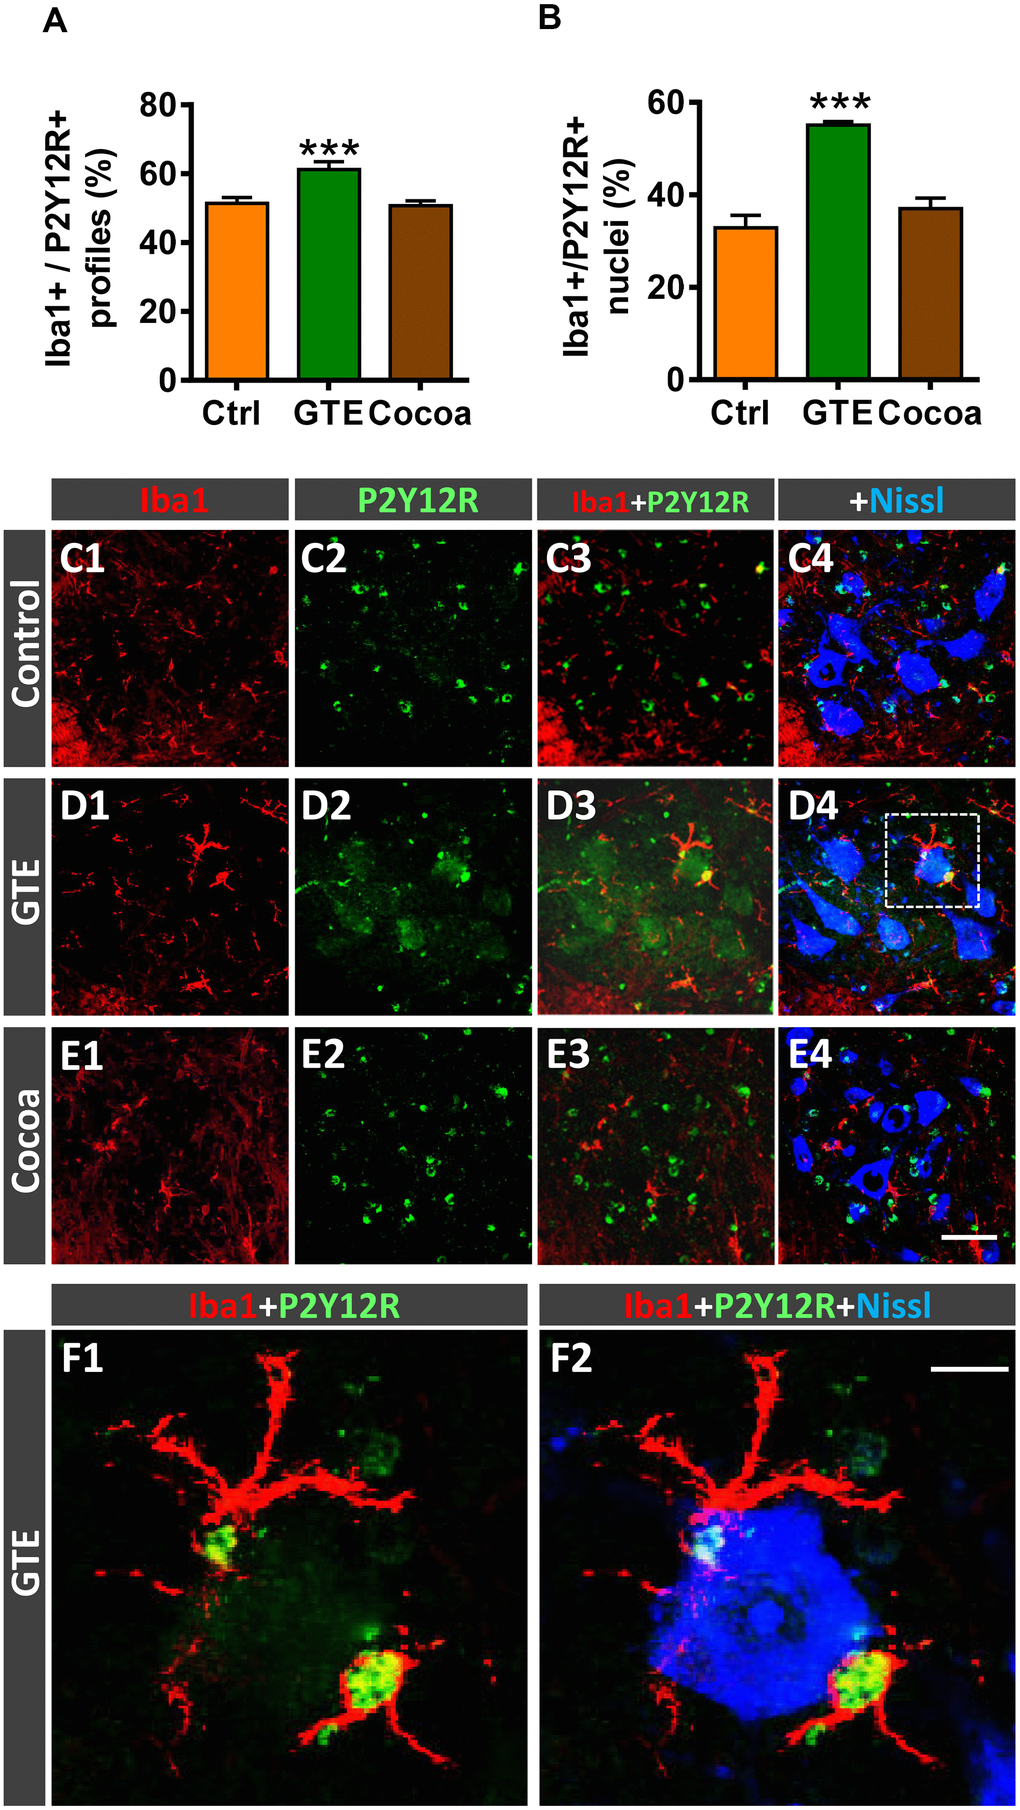 Impact of GTE- and cocoa-supplemented diets on P2Y12R expression in spinal cord microglia of old mice. Sections of lumbar spinal cords from mice of different experimental groups were double immunostained for Iba1 and P2Y12R. (A, B) Quantification of Iba1-positive profiles also exhibiting P2Y12R immunoreactivity (A) and of those displaying nuclear P2Y12R expression (B). (C1–F2) Representative confocal micrographs used for data analysis showing P2Y12R (green) in combination with Iba1 (red) and fluorescent Nissl staining (blue, for MN visualization), as indicated in panels. A higher magnification of area delimited by the dashed square in D4 is shown in (F1, F2). Note the nuclear expression of P2Y12R in Iba1-positive microglial cells in close contact with a MN. Data in the graphs are expressed as the mean ± SEM; a total of 40-50 images per experimental group were analyzed (number of animals per group: control [Ctrl] = 3, GTE = 4, cocoa = 5); ***p post hoc test). Scale bar: 50 μm in (E4) (valid for C1–E3) and 10 μm in (F2) (valid for F1).